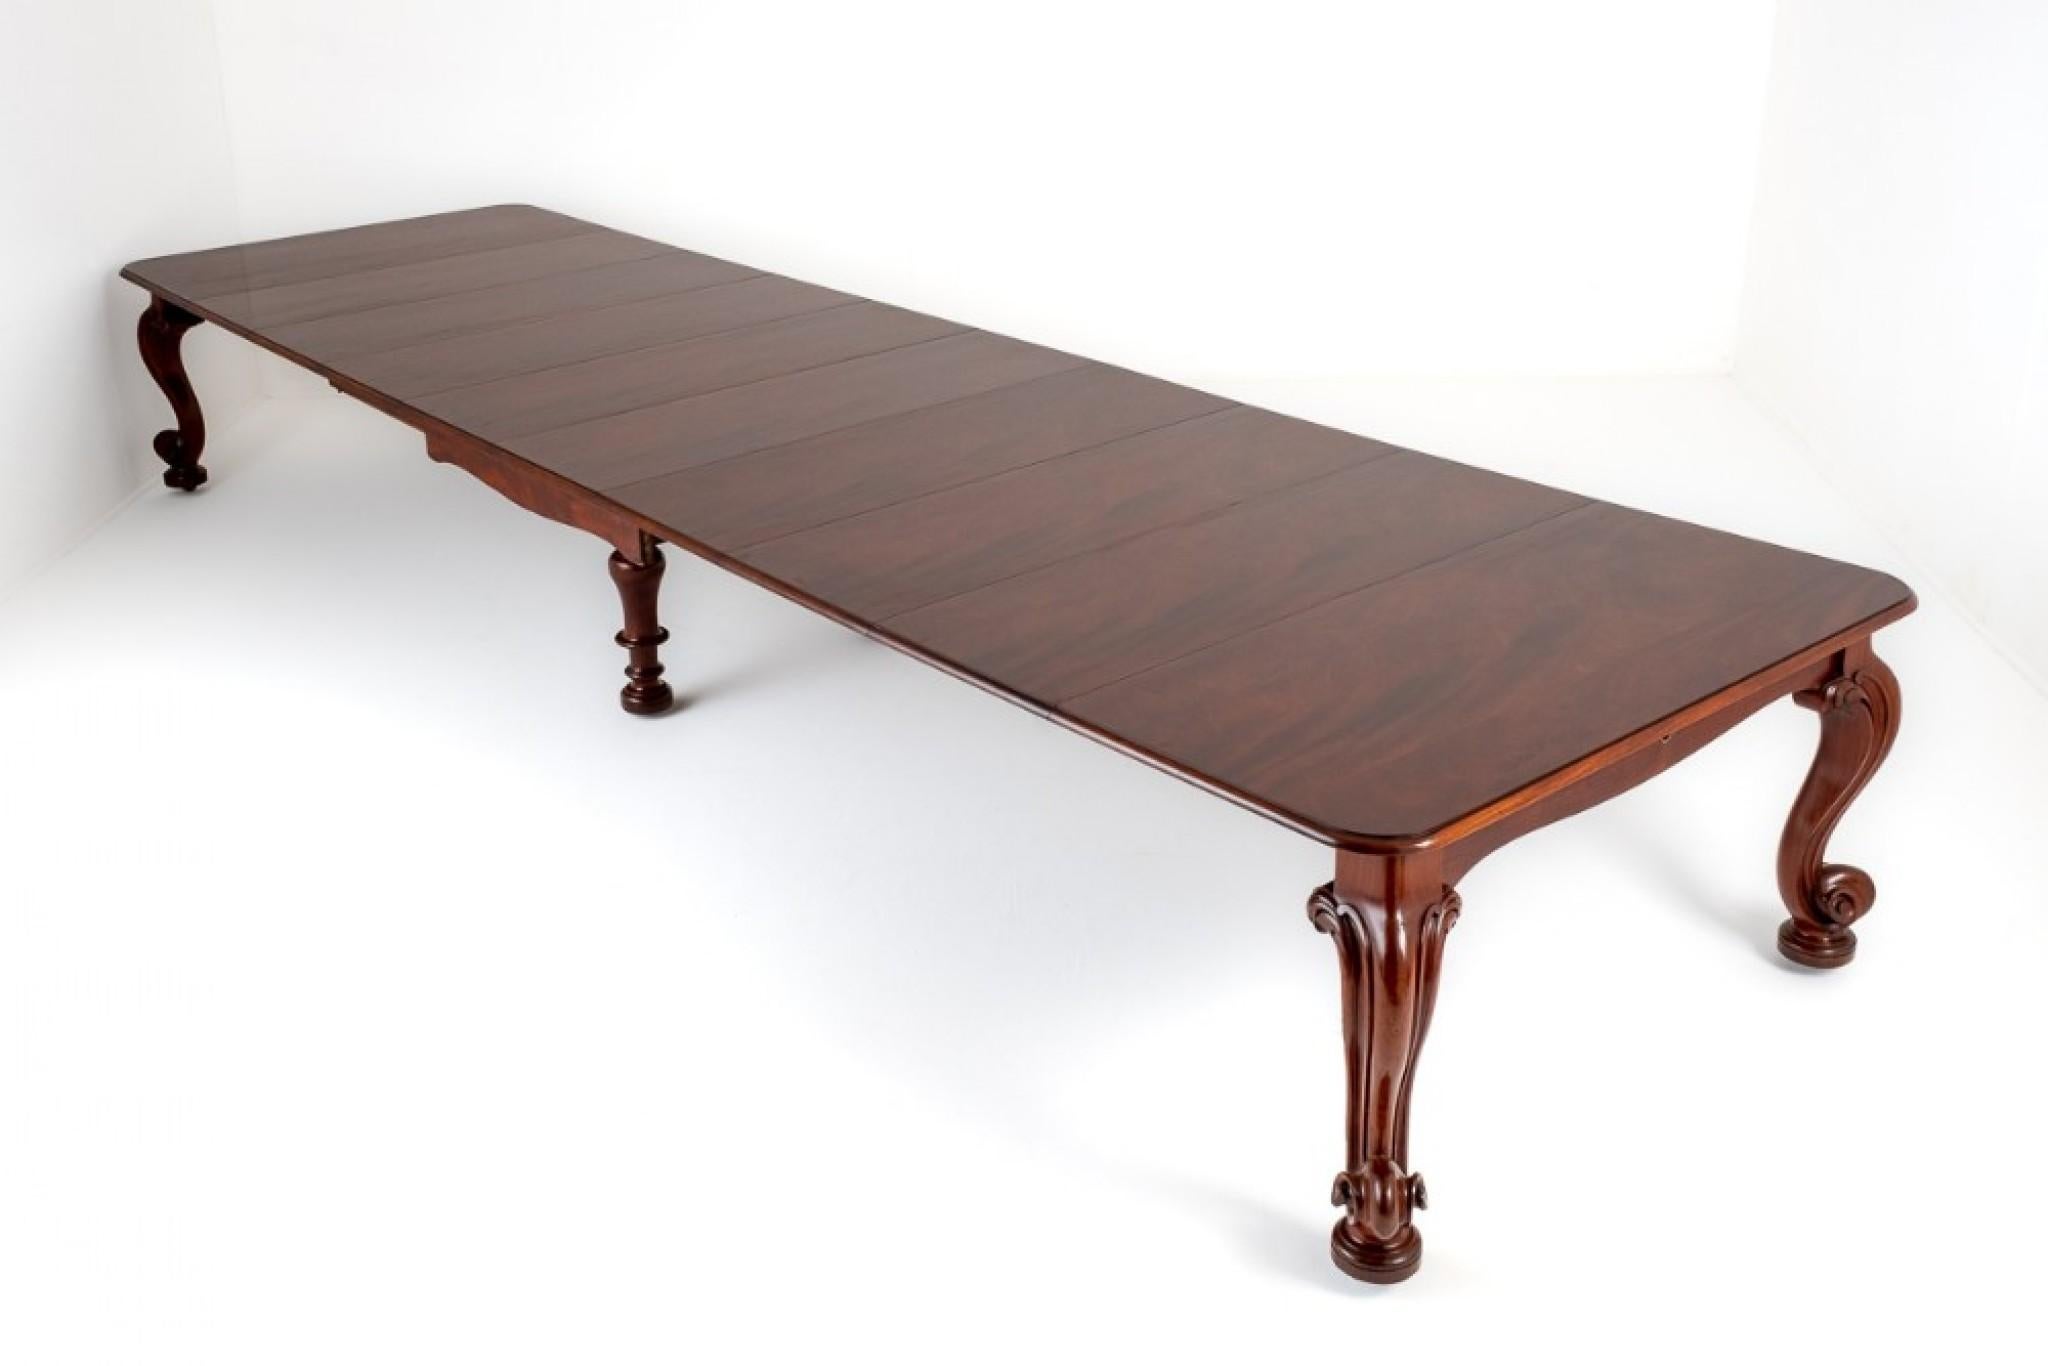 Mid-19th Century Giant Victorian Dining Table Seats 24 by Samuel Hawkins 1860 For Sale